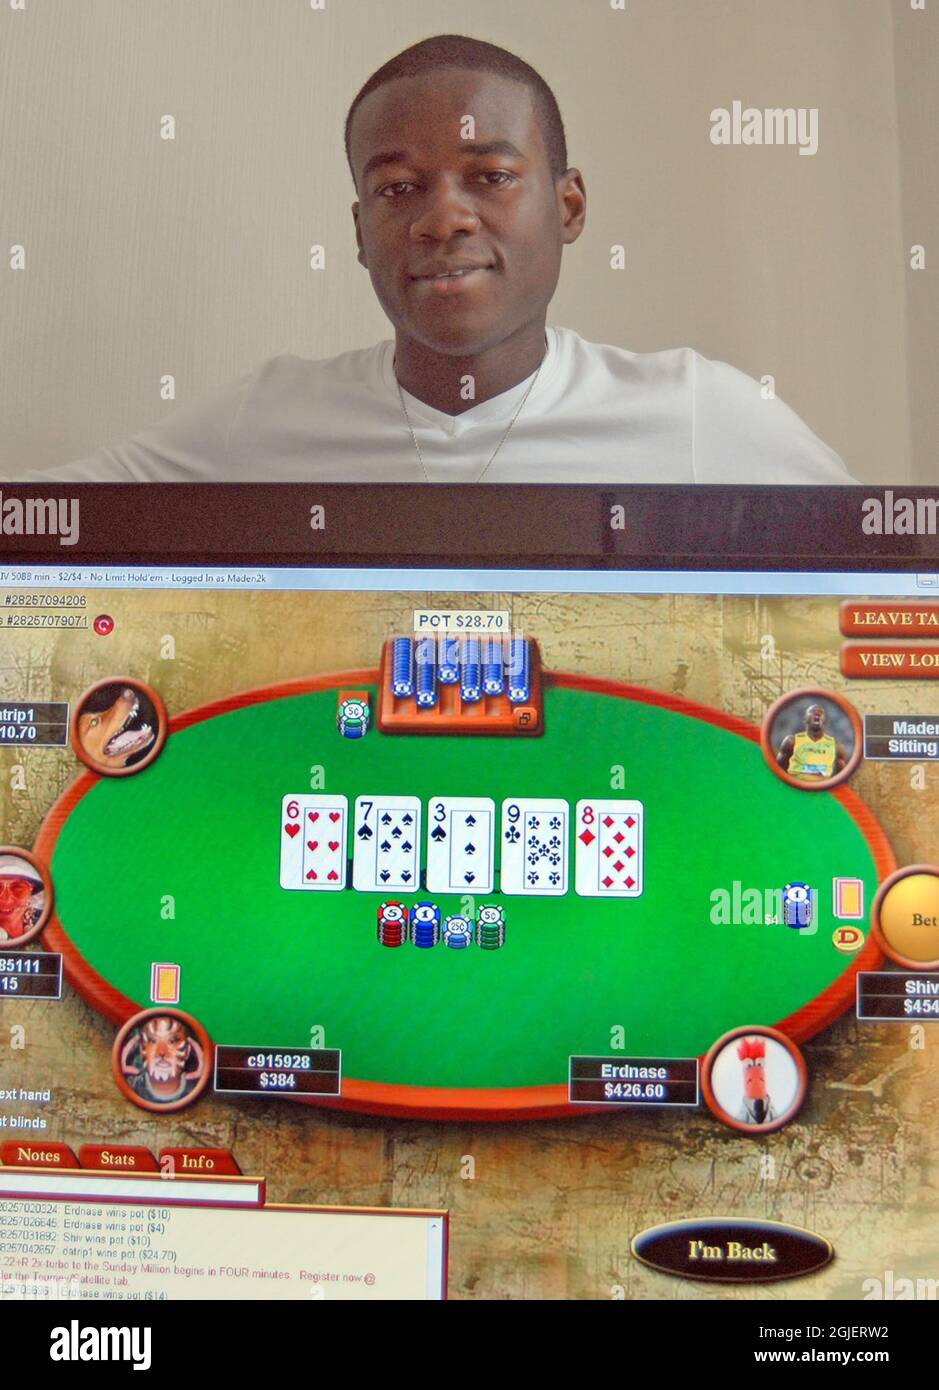 MARTINS (CORRECT) ADENIYA WHO HAS GIVEN UP HIS JOB AS A CITY BANKER TO BECOME A PROFESSIONAL POKER PLAYER. PIC MIKE WALKER, 2009 Stock Photo